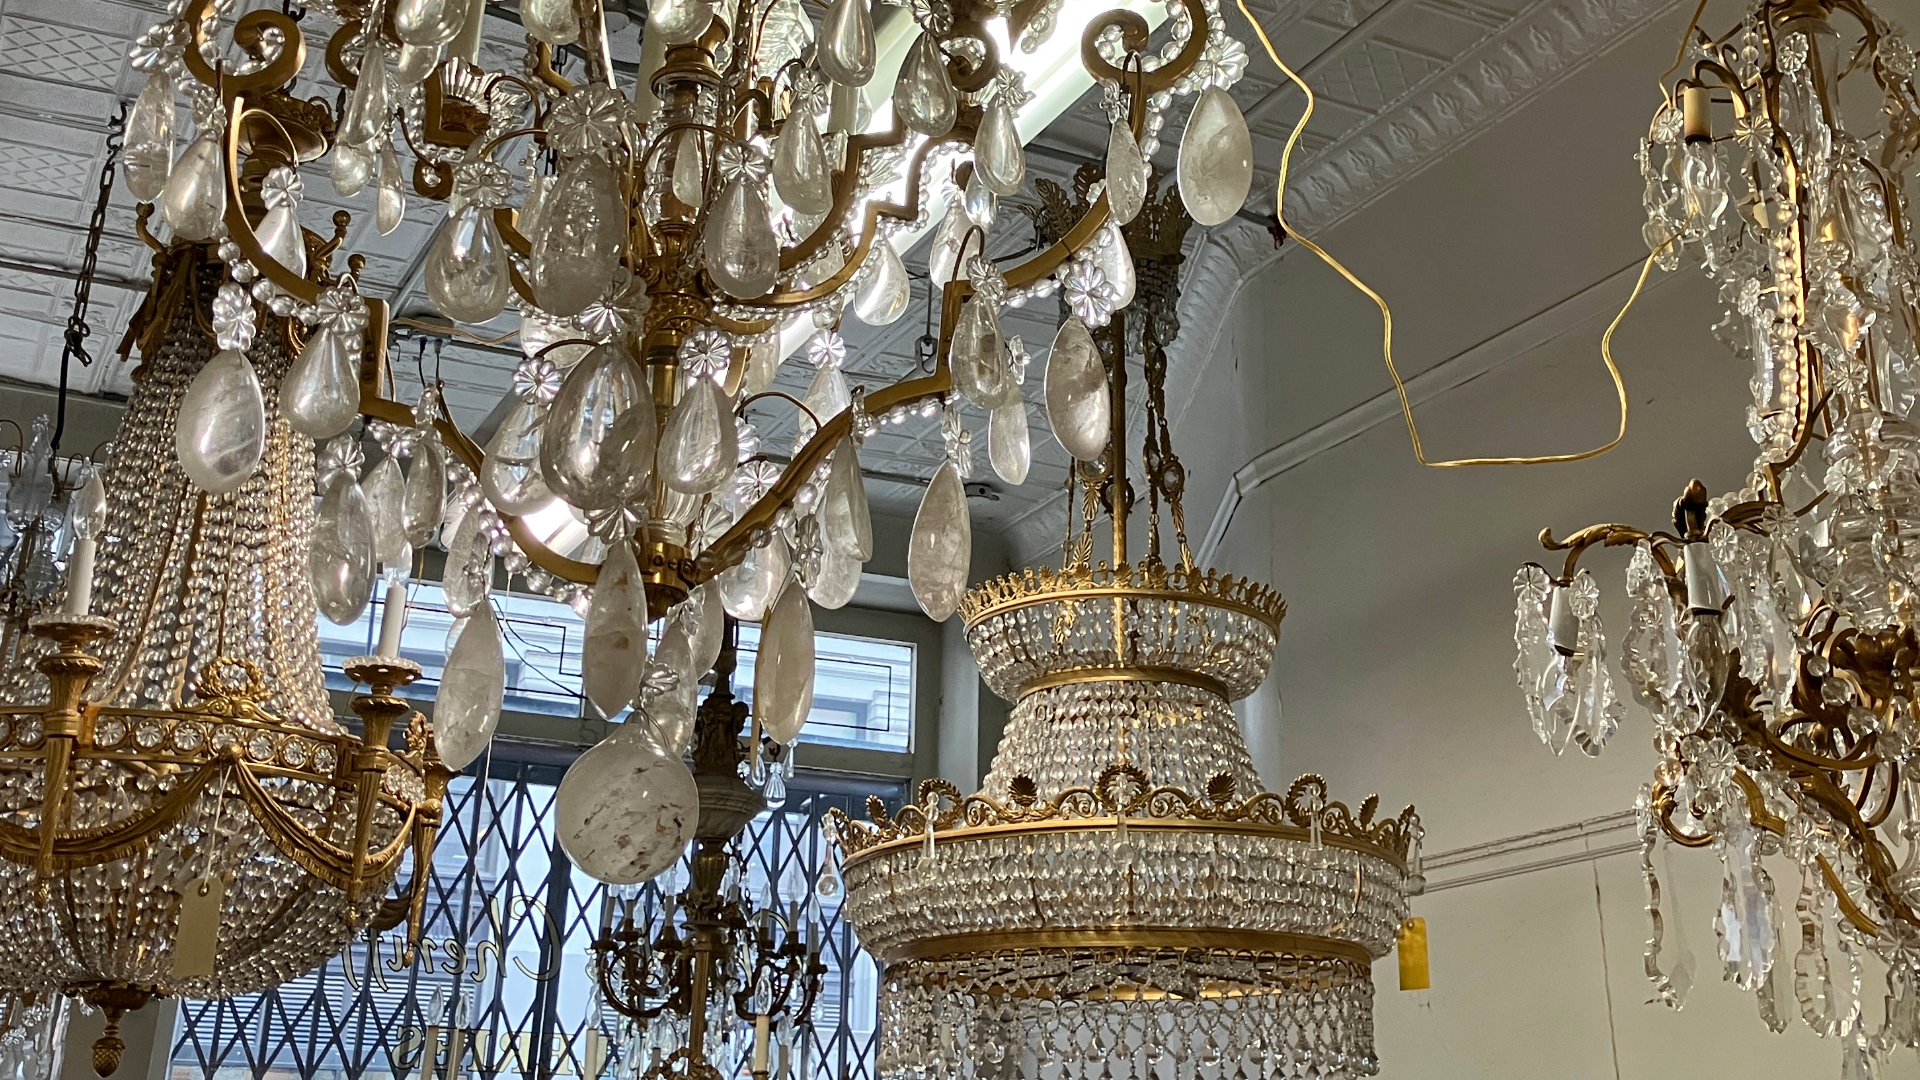 detail of chandeliers hanging from the ceiling